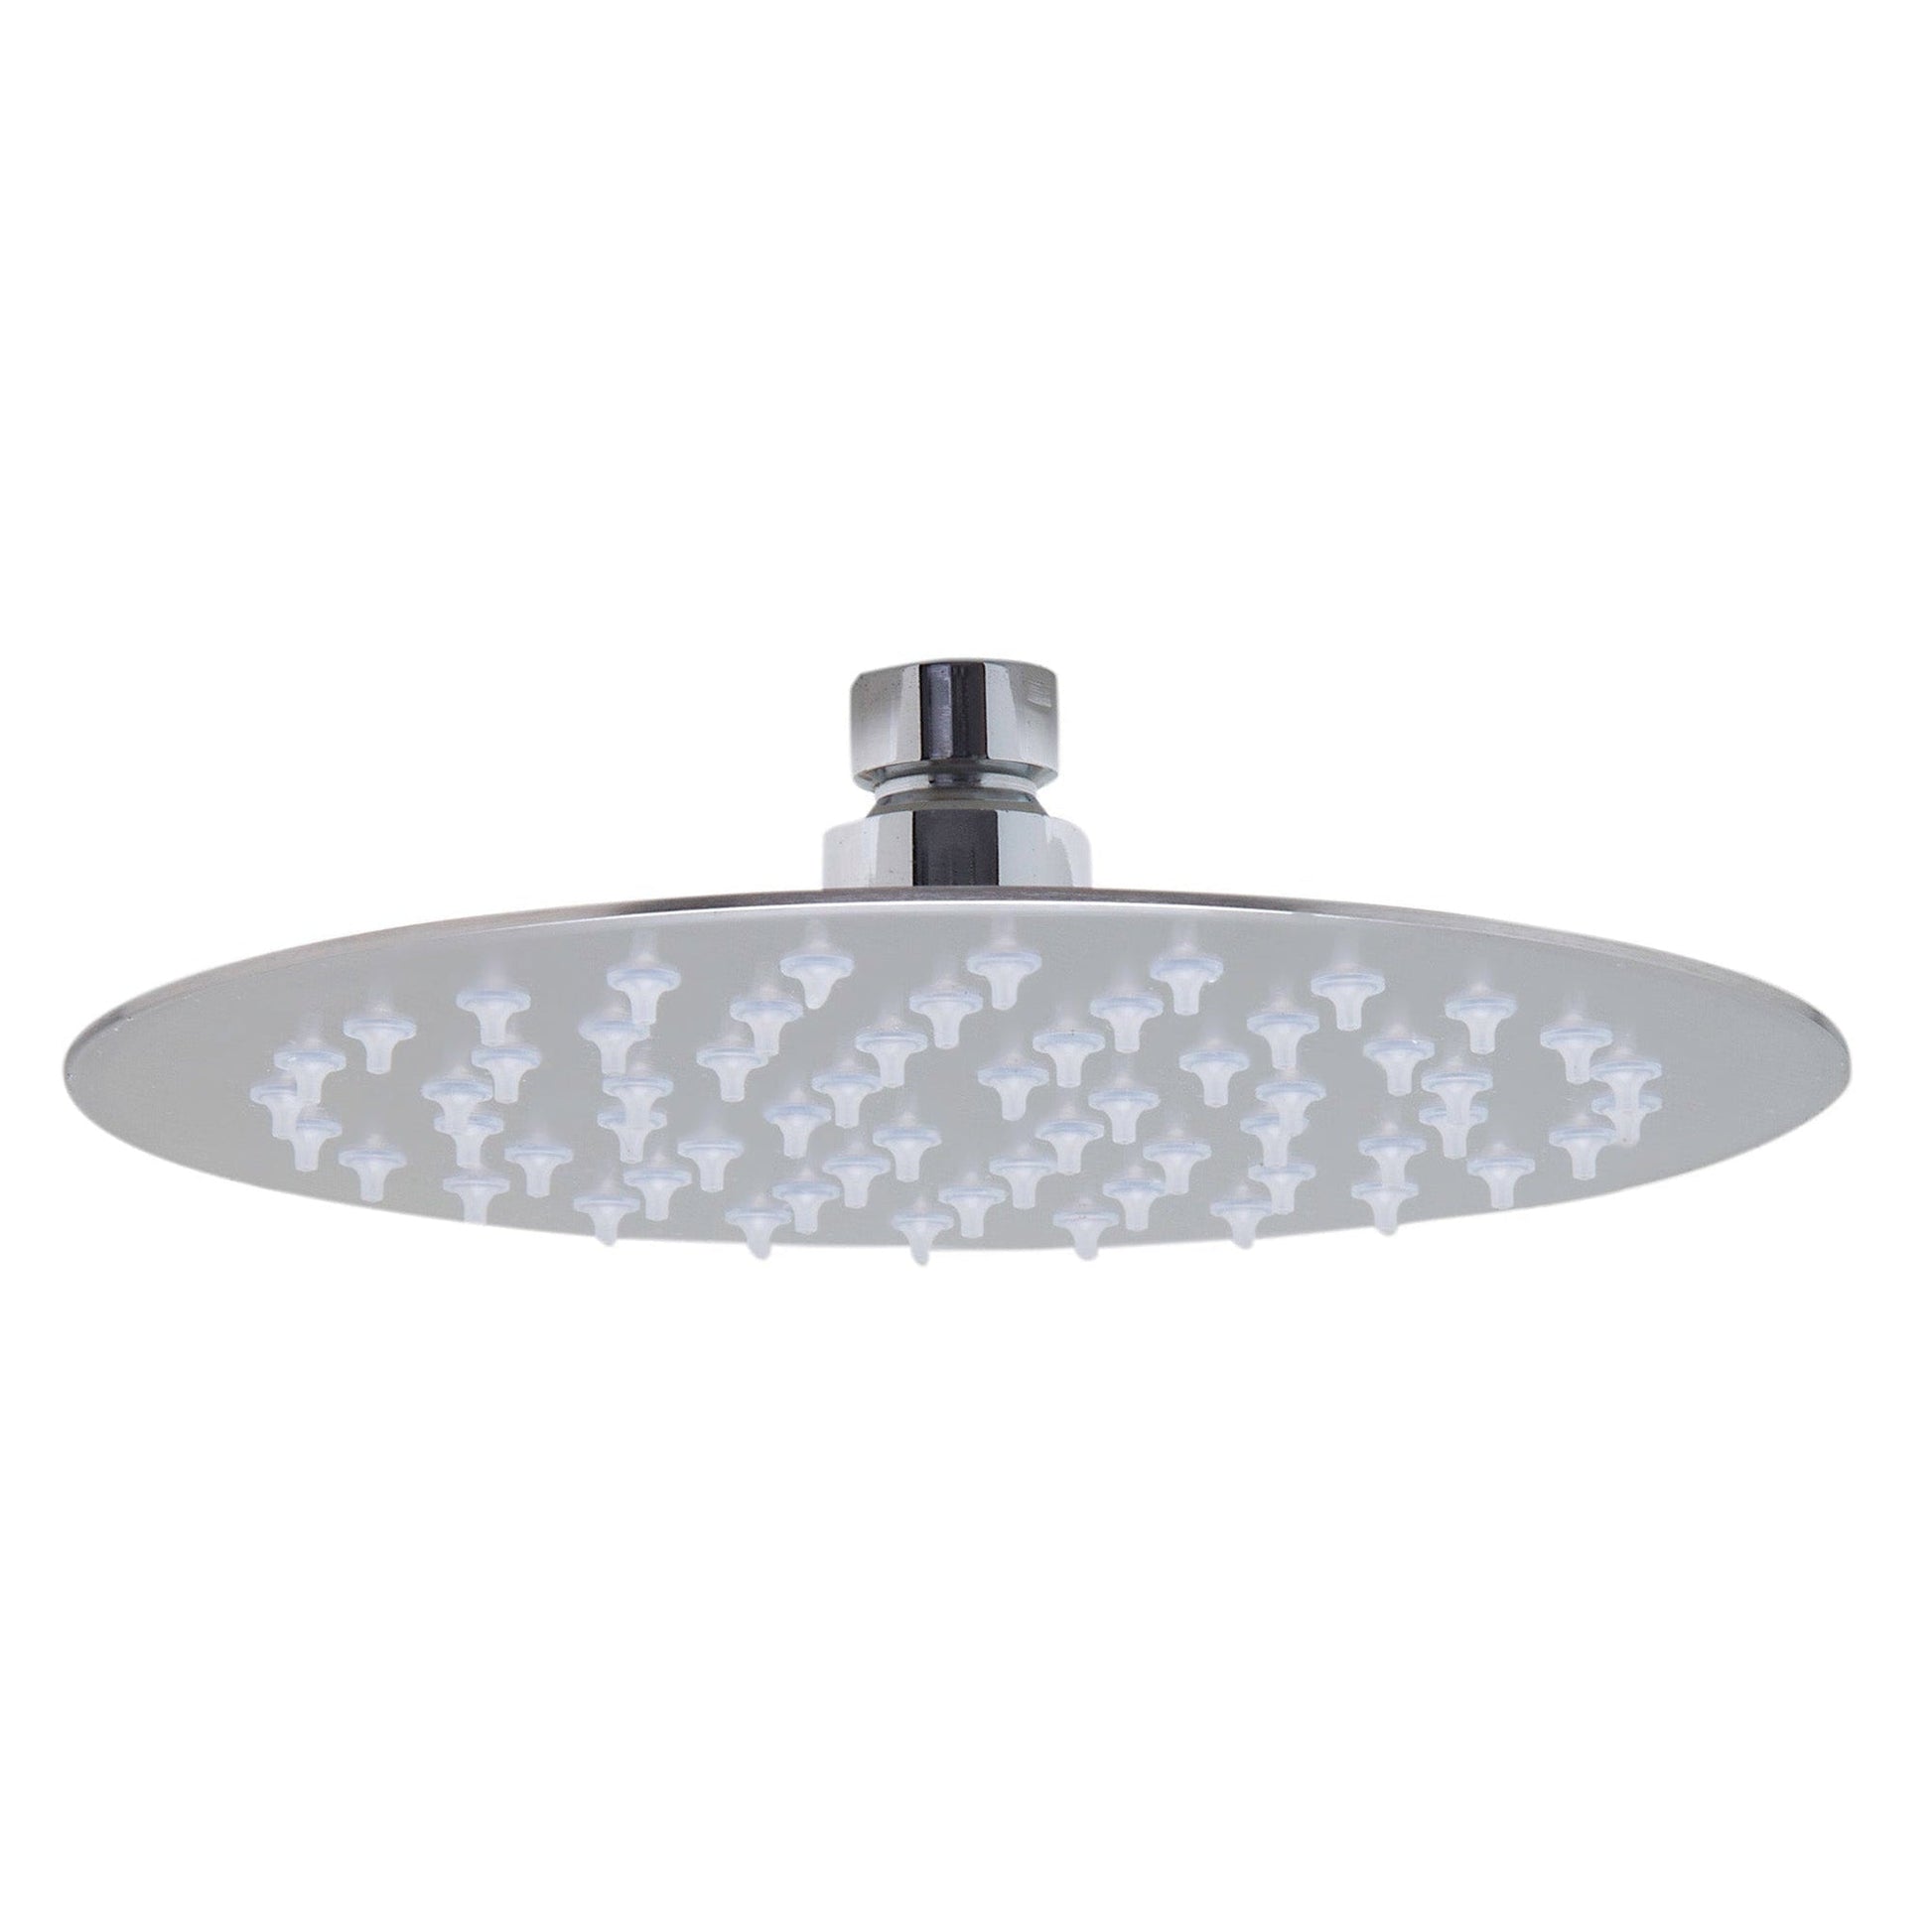 ALFI Brand RAIN8R-BSS 8" Round Solid Brushed Stainless Steel Wall or Ceiling Mounted Ultra Thin Rain Brass Shower Head